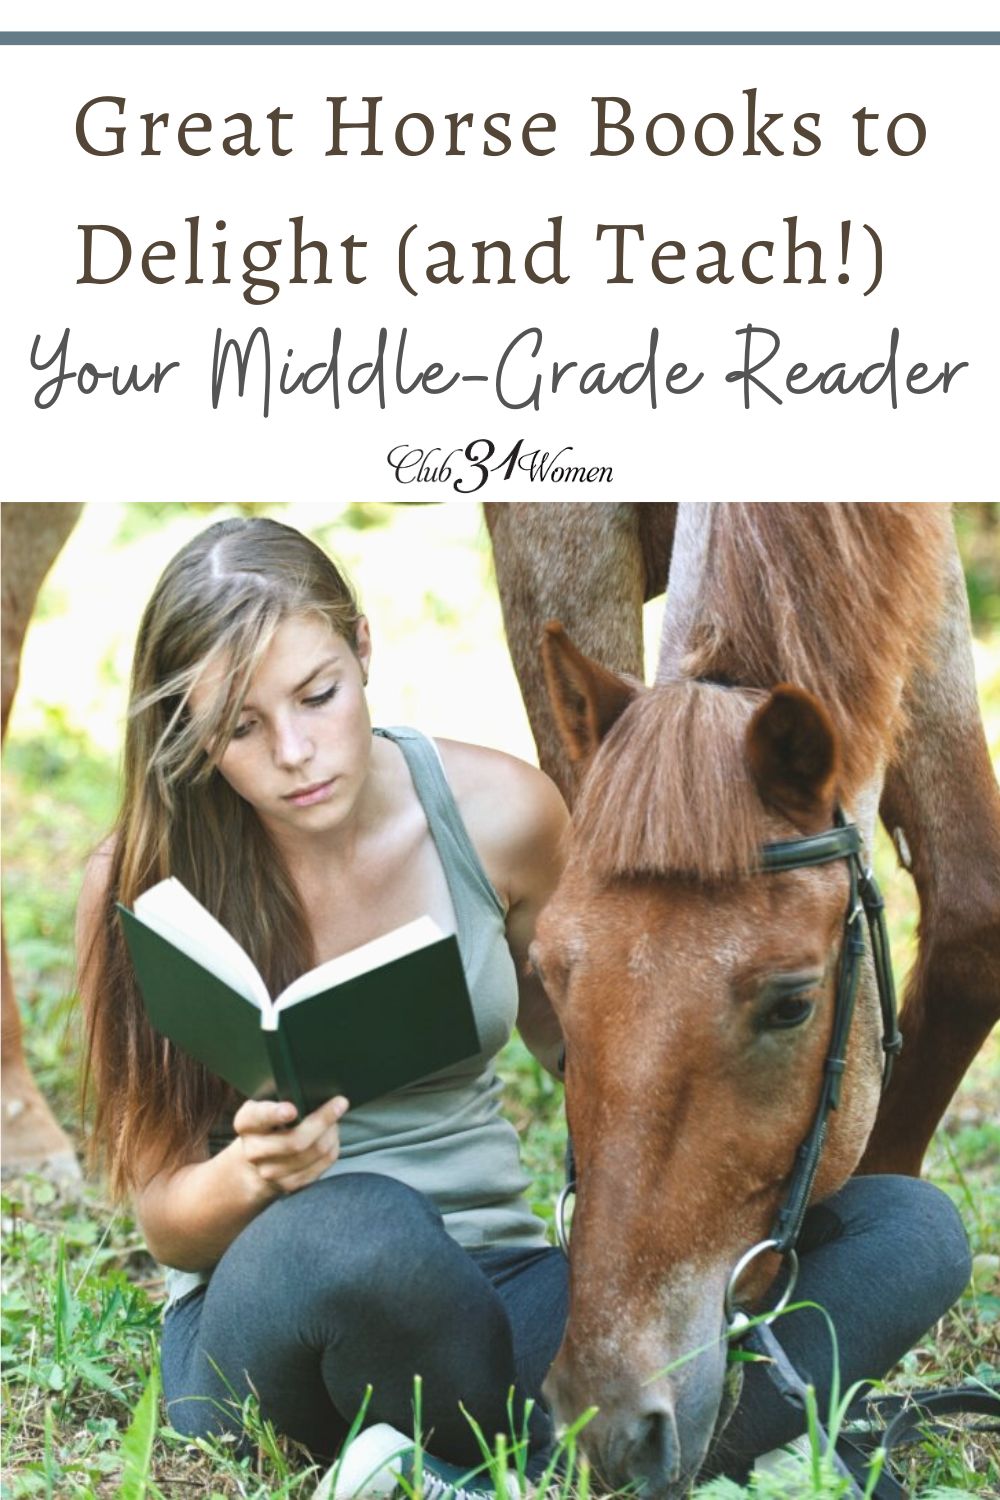 Do you have a middle school girl who loves horses and can't get enough great horse stories? Here is a list of amazing horse stories to add to her list! via @Club31Women